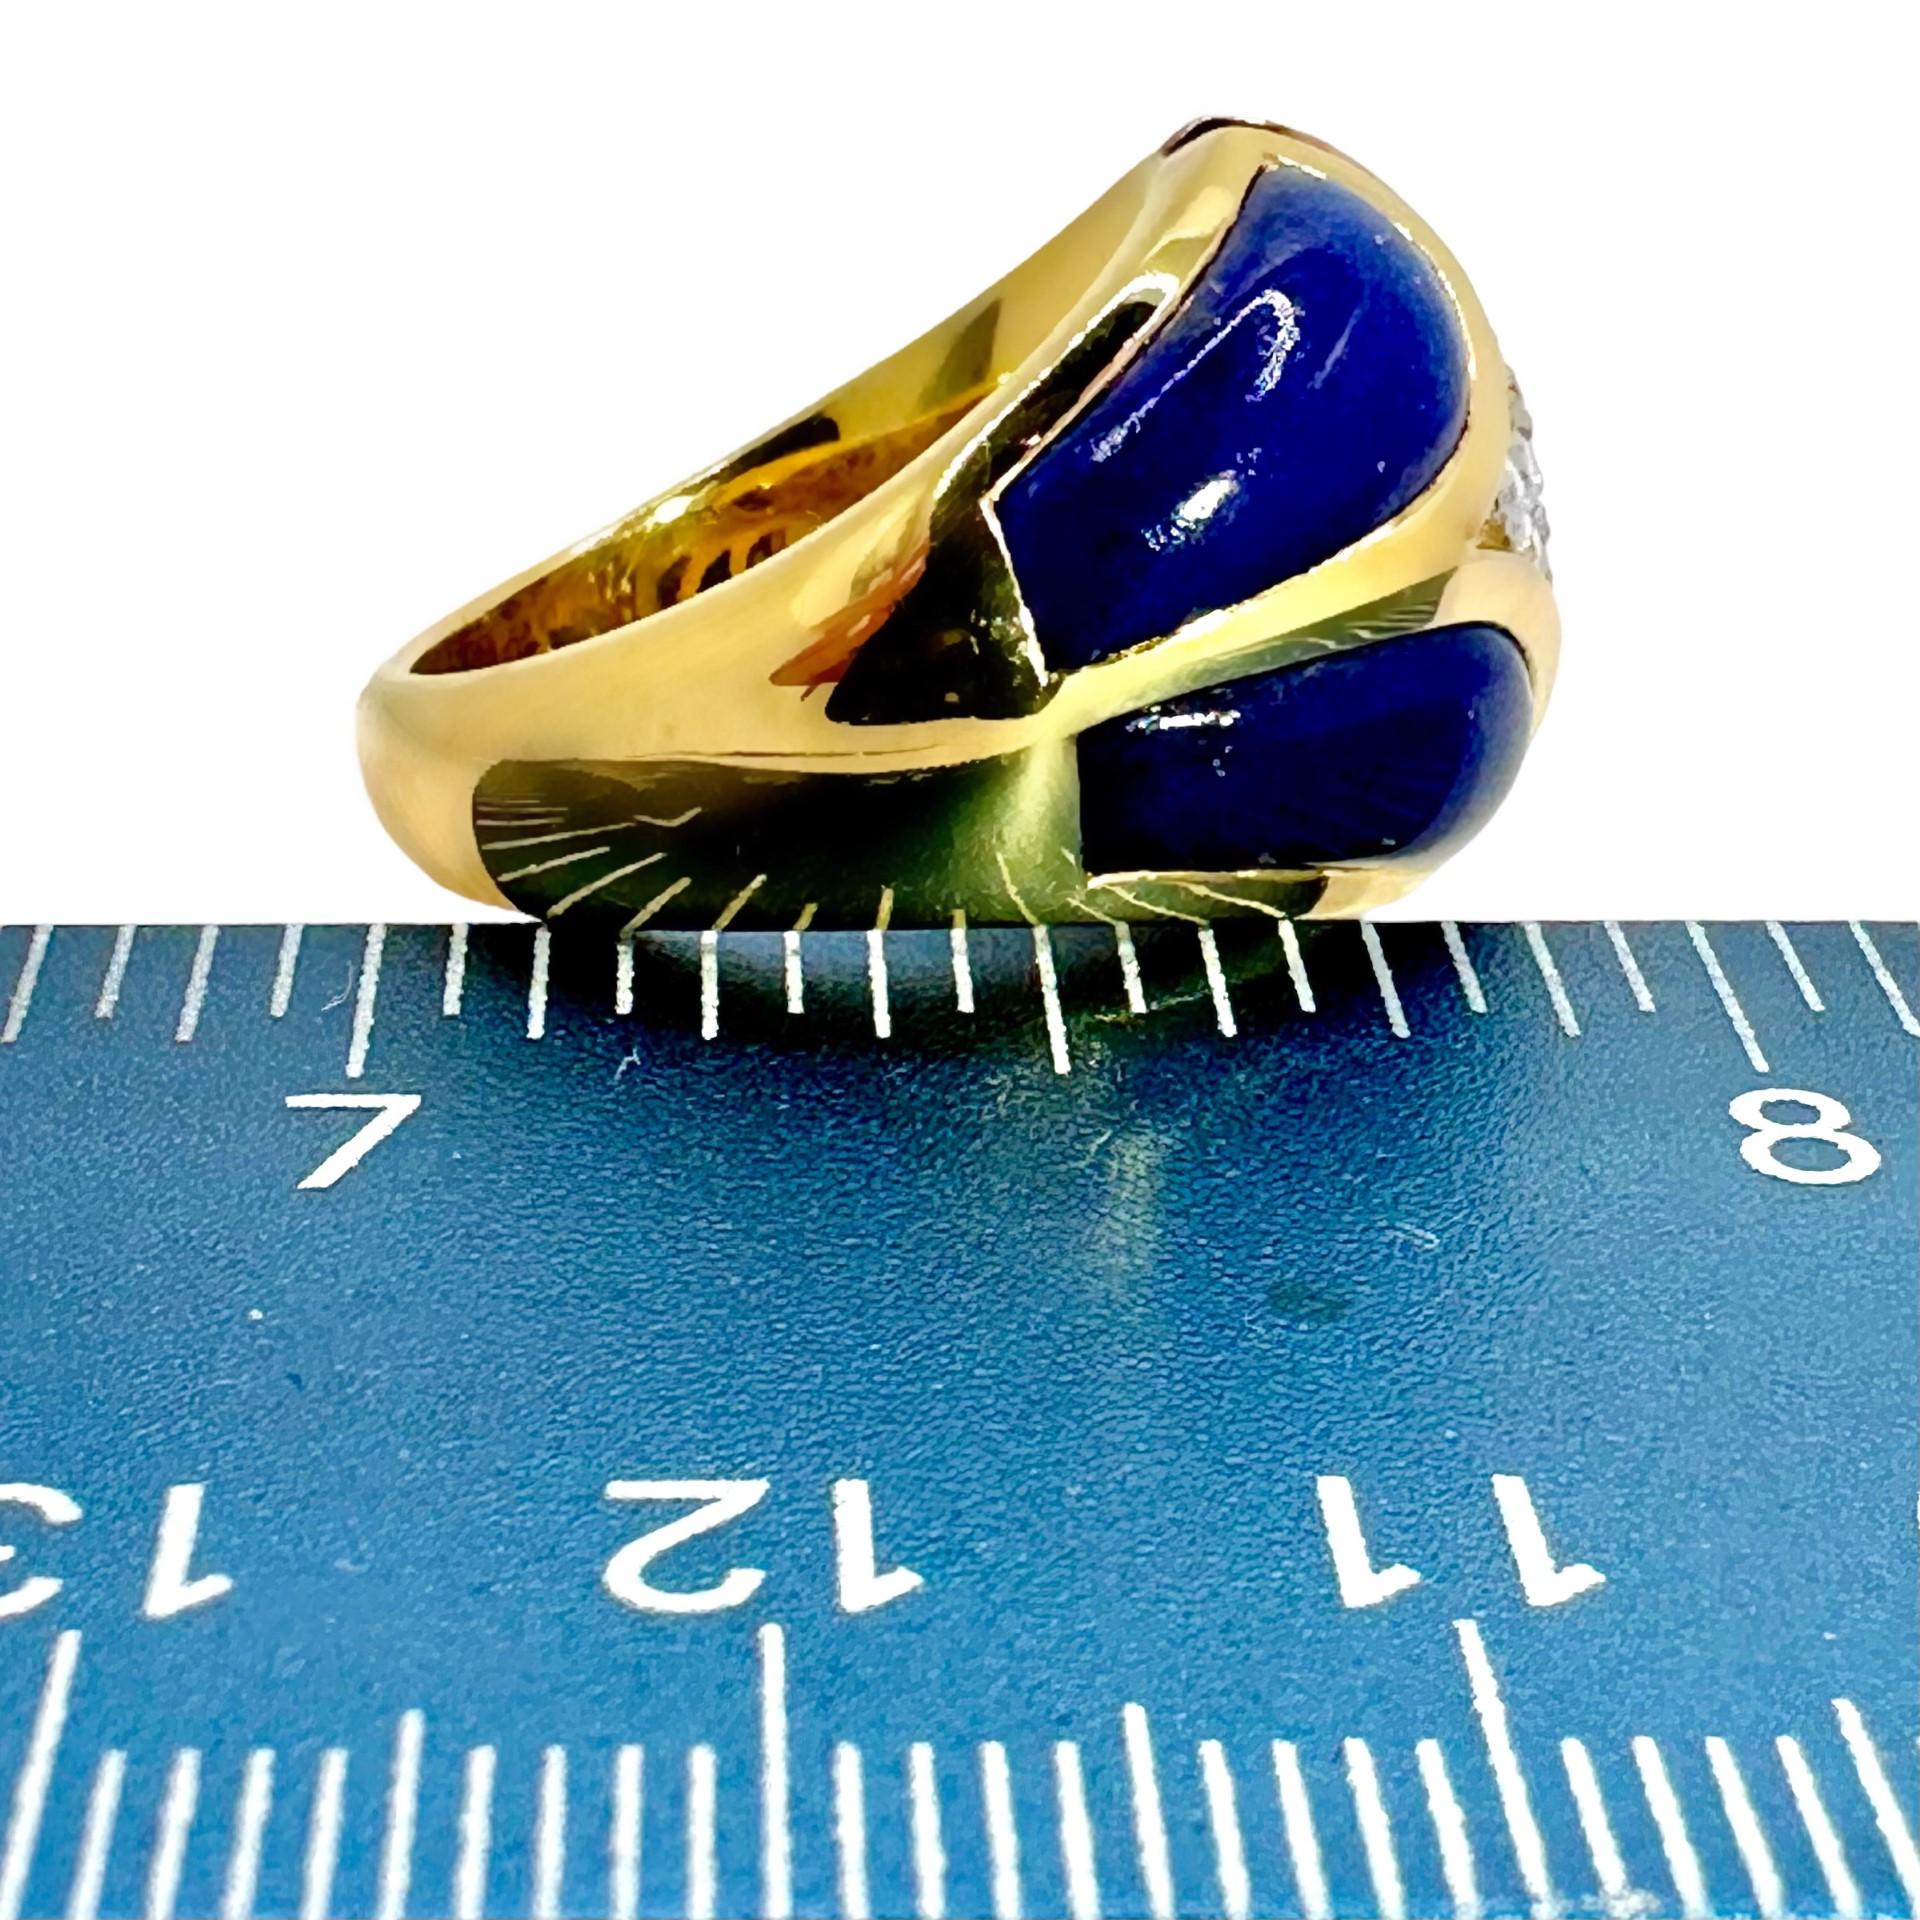 Late-20th Century 18k Yellow Gold, Lapis-Lazuli and Diamond Fashion Ring For Sale 3